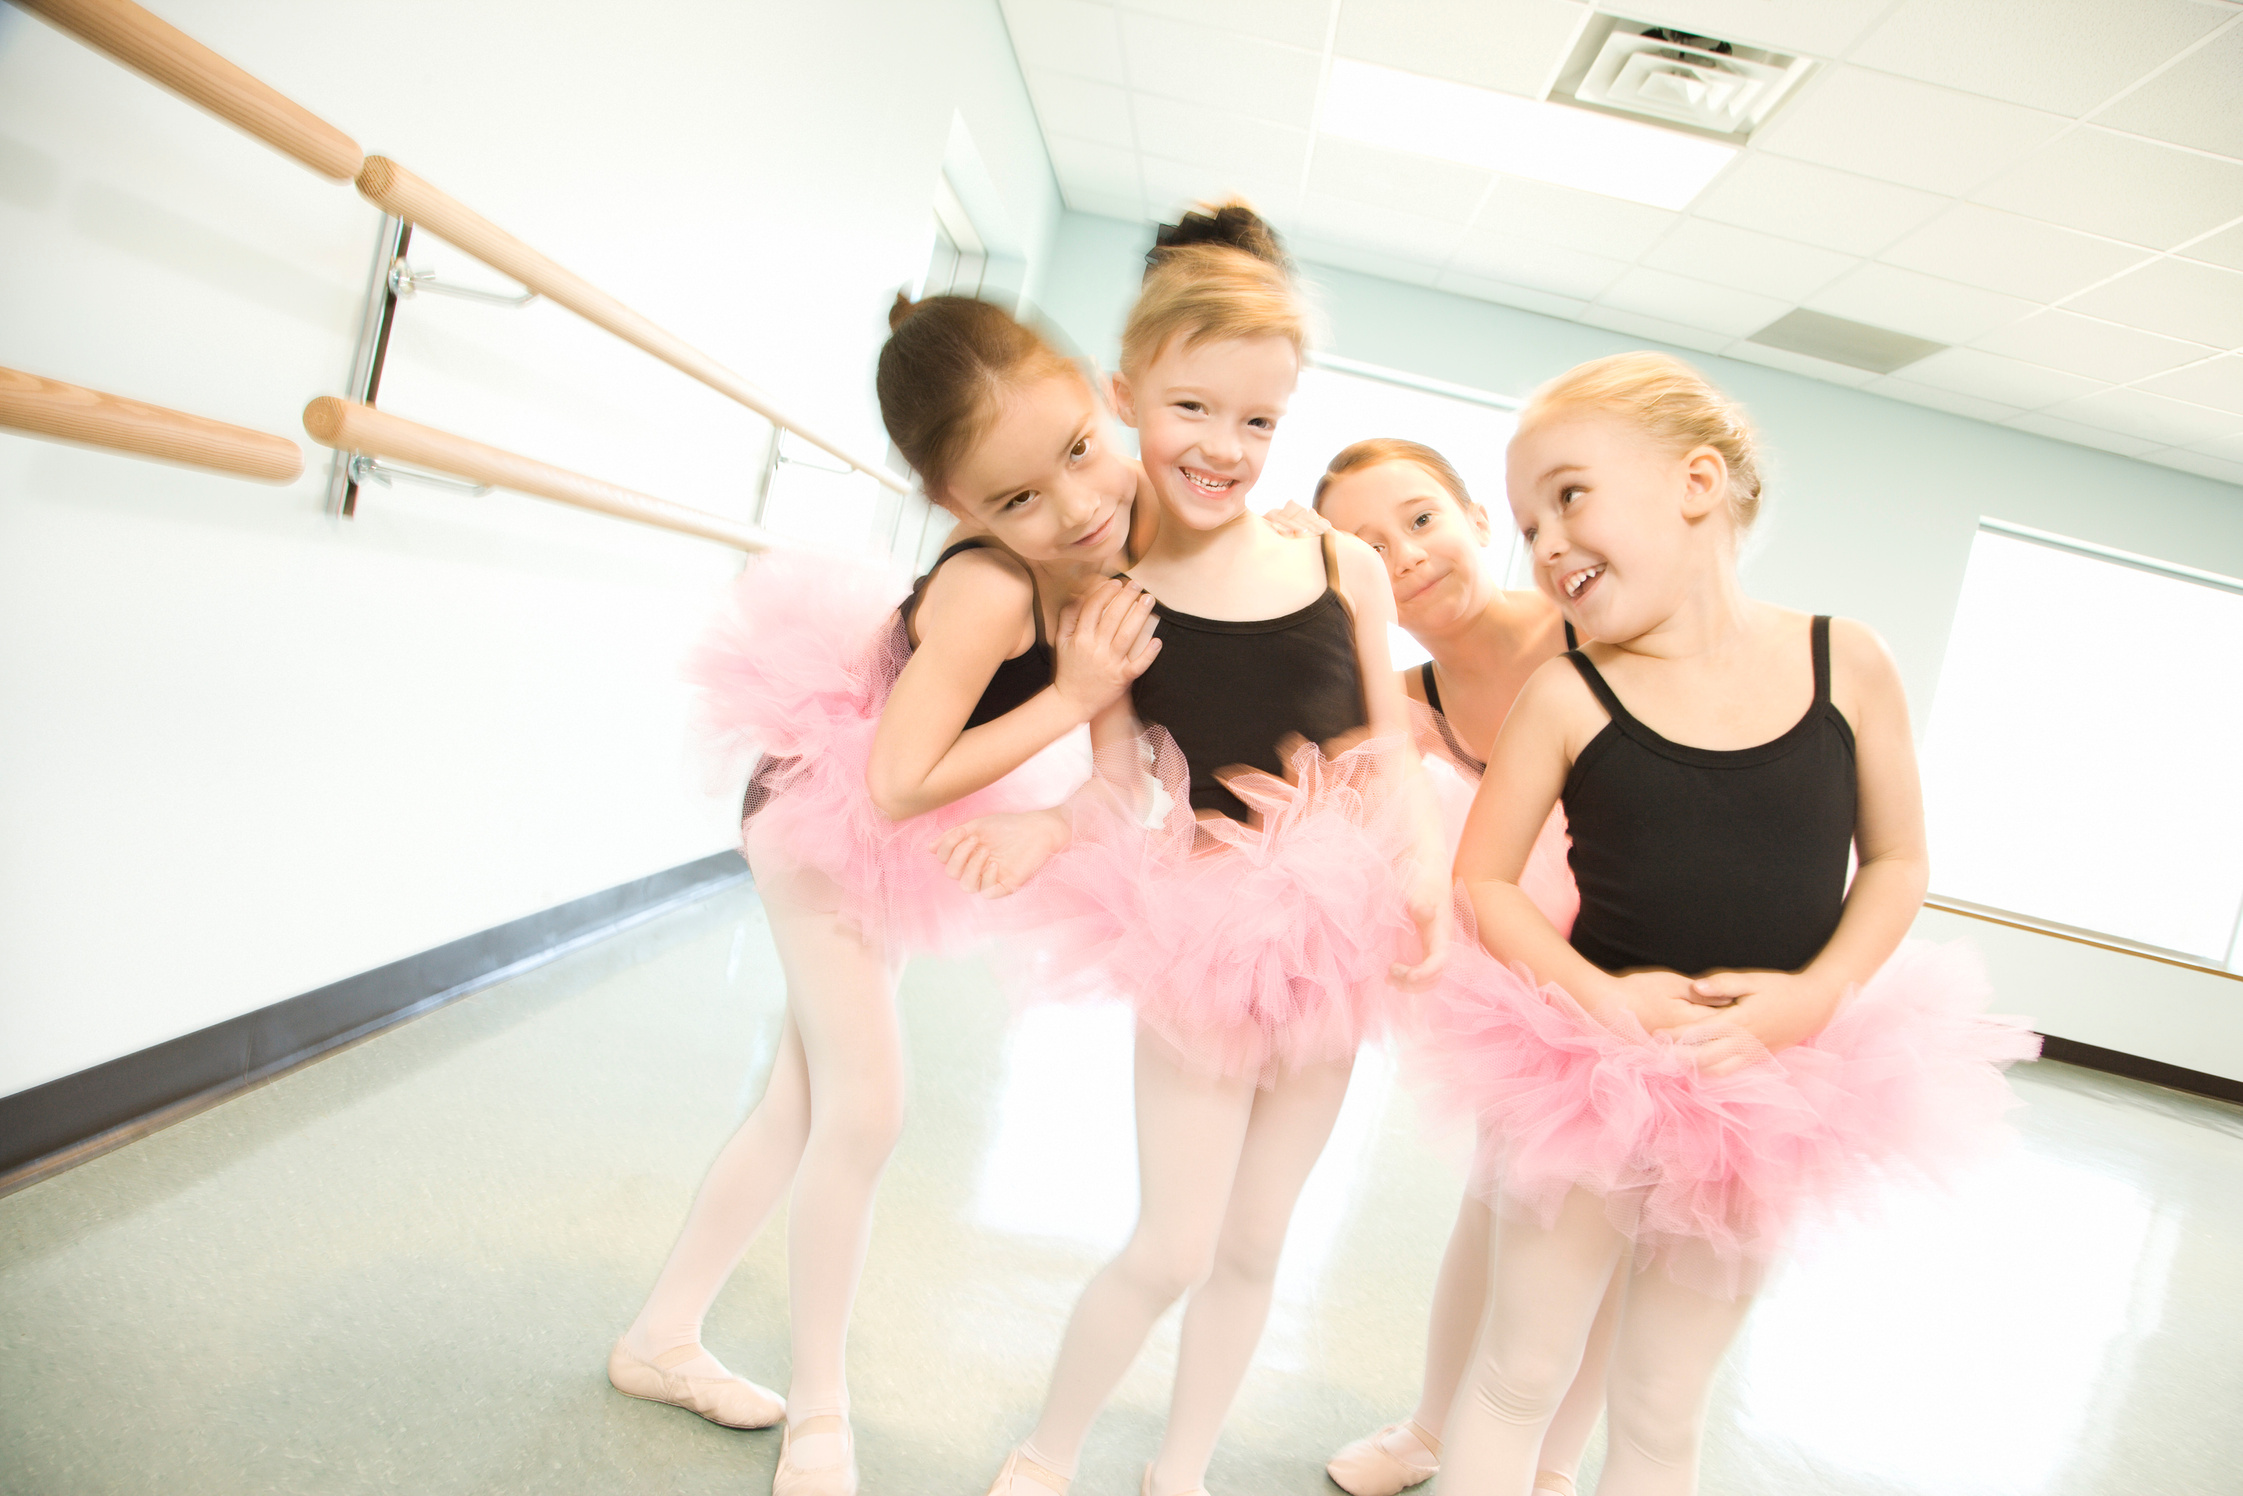 Girls in ballet class posing together